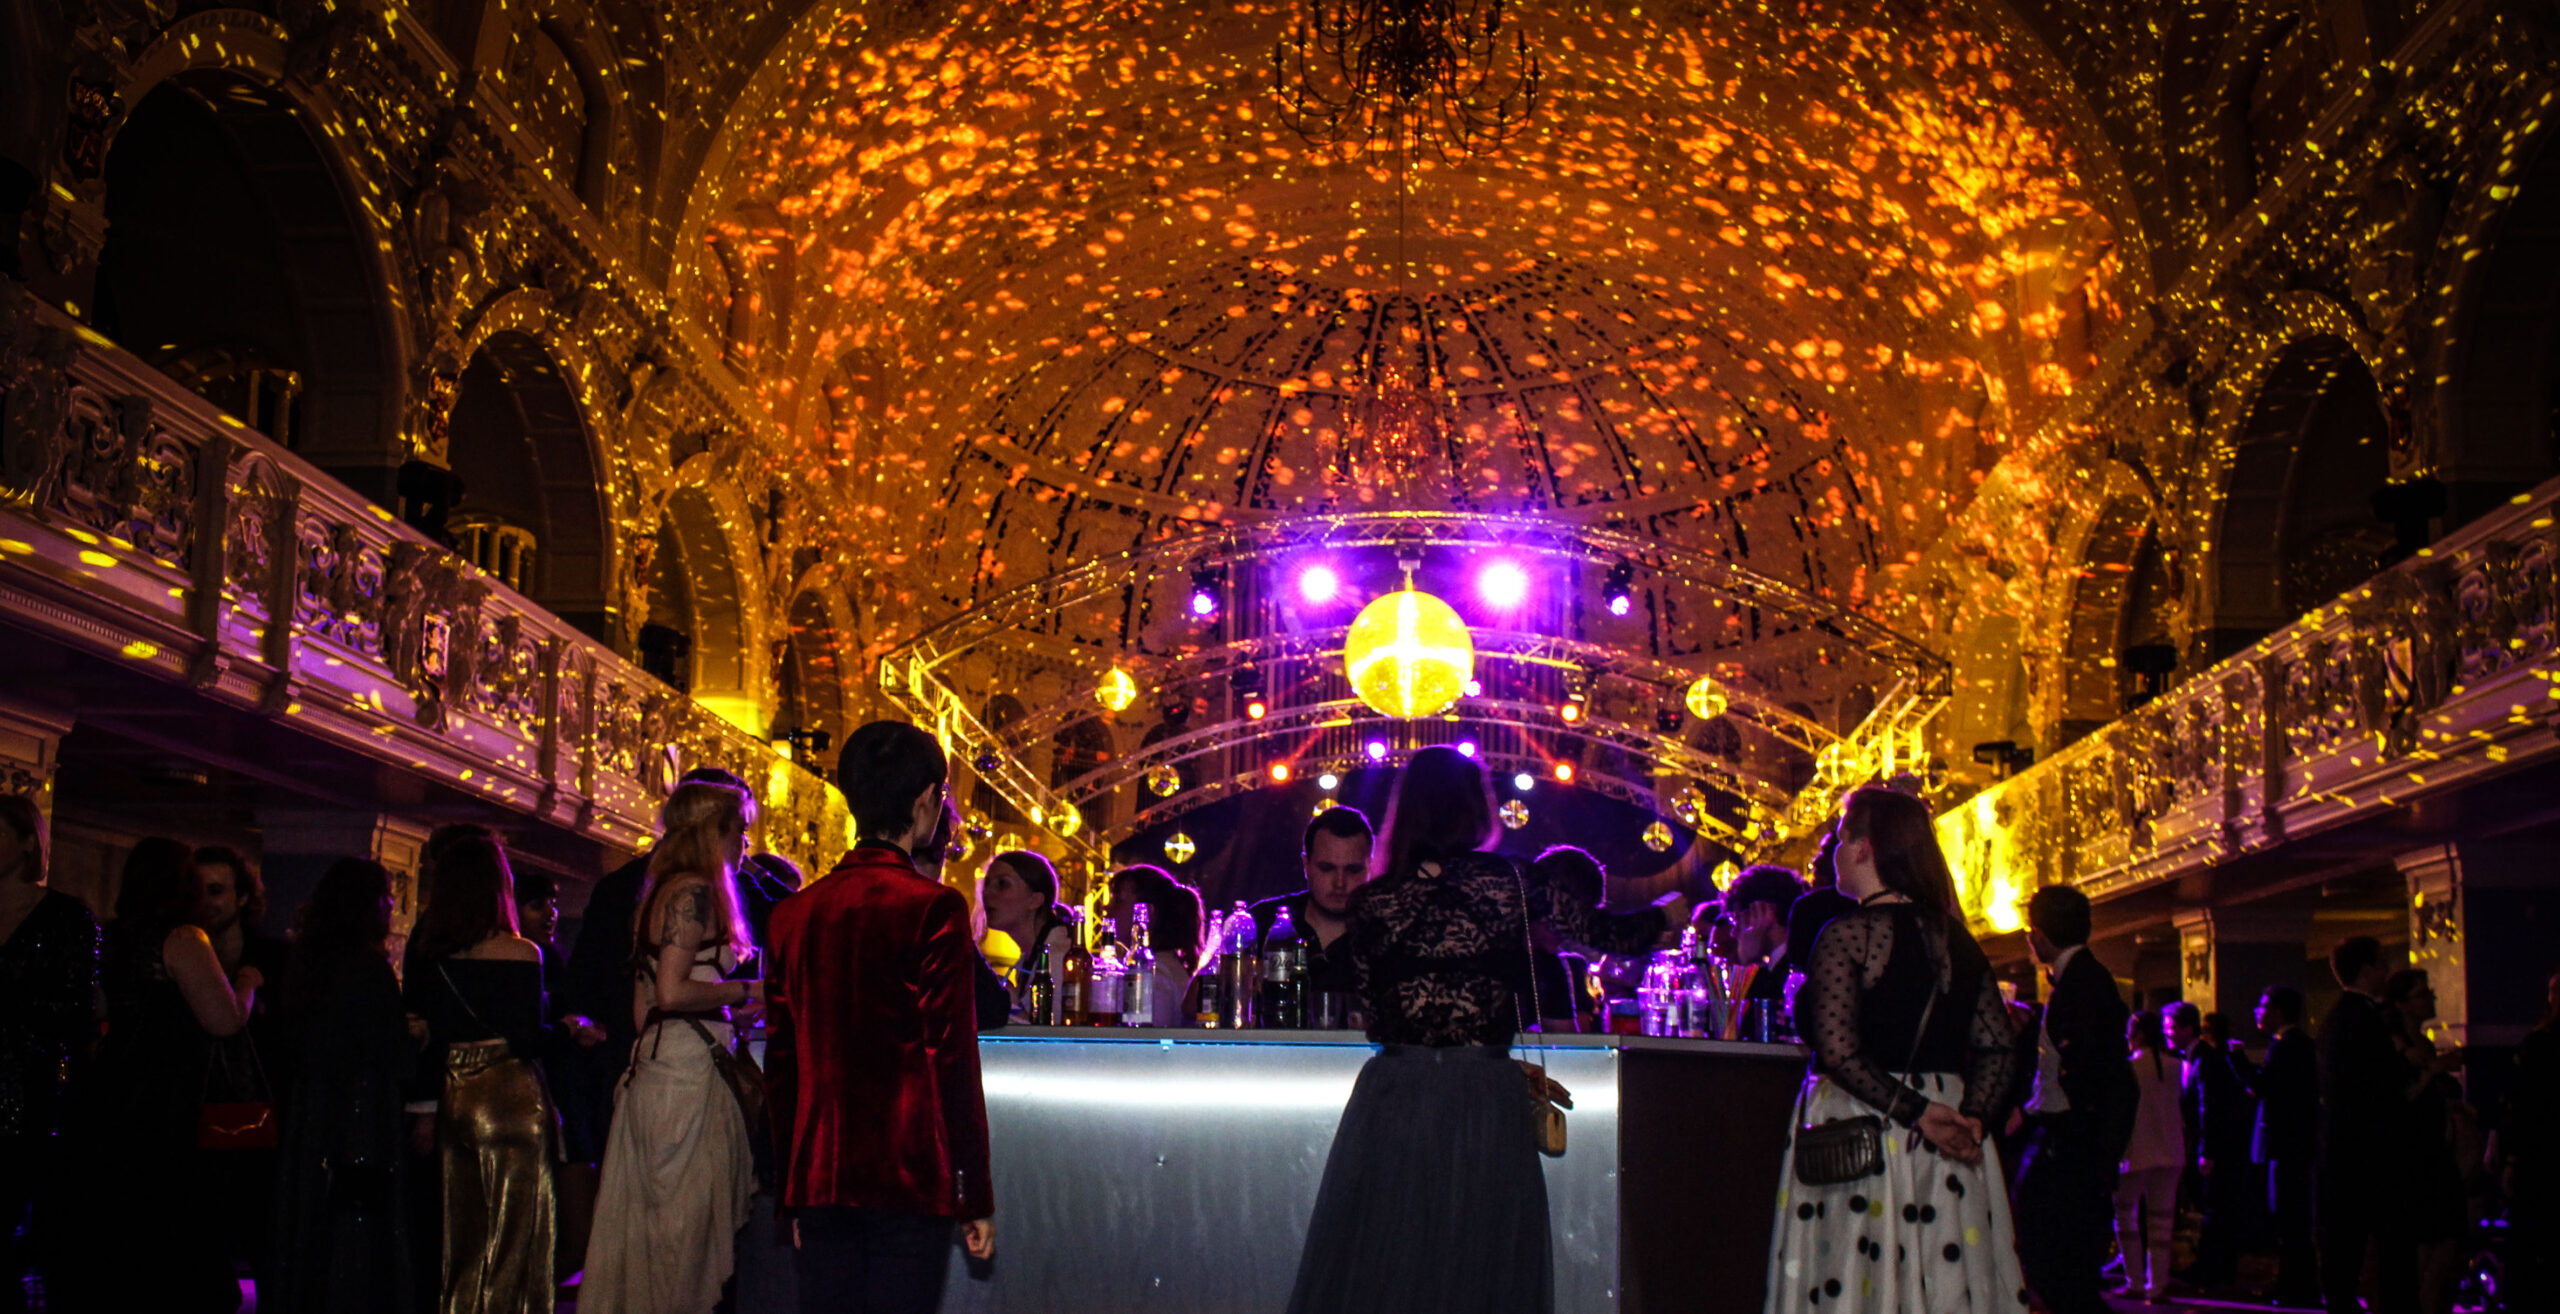 Image from Glitterball 2017. People standing at bar, bathed in orange glow from the lights